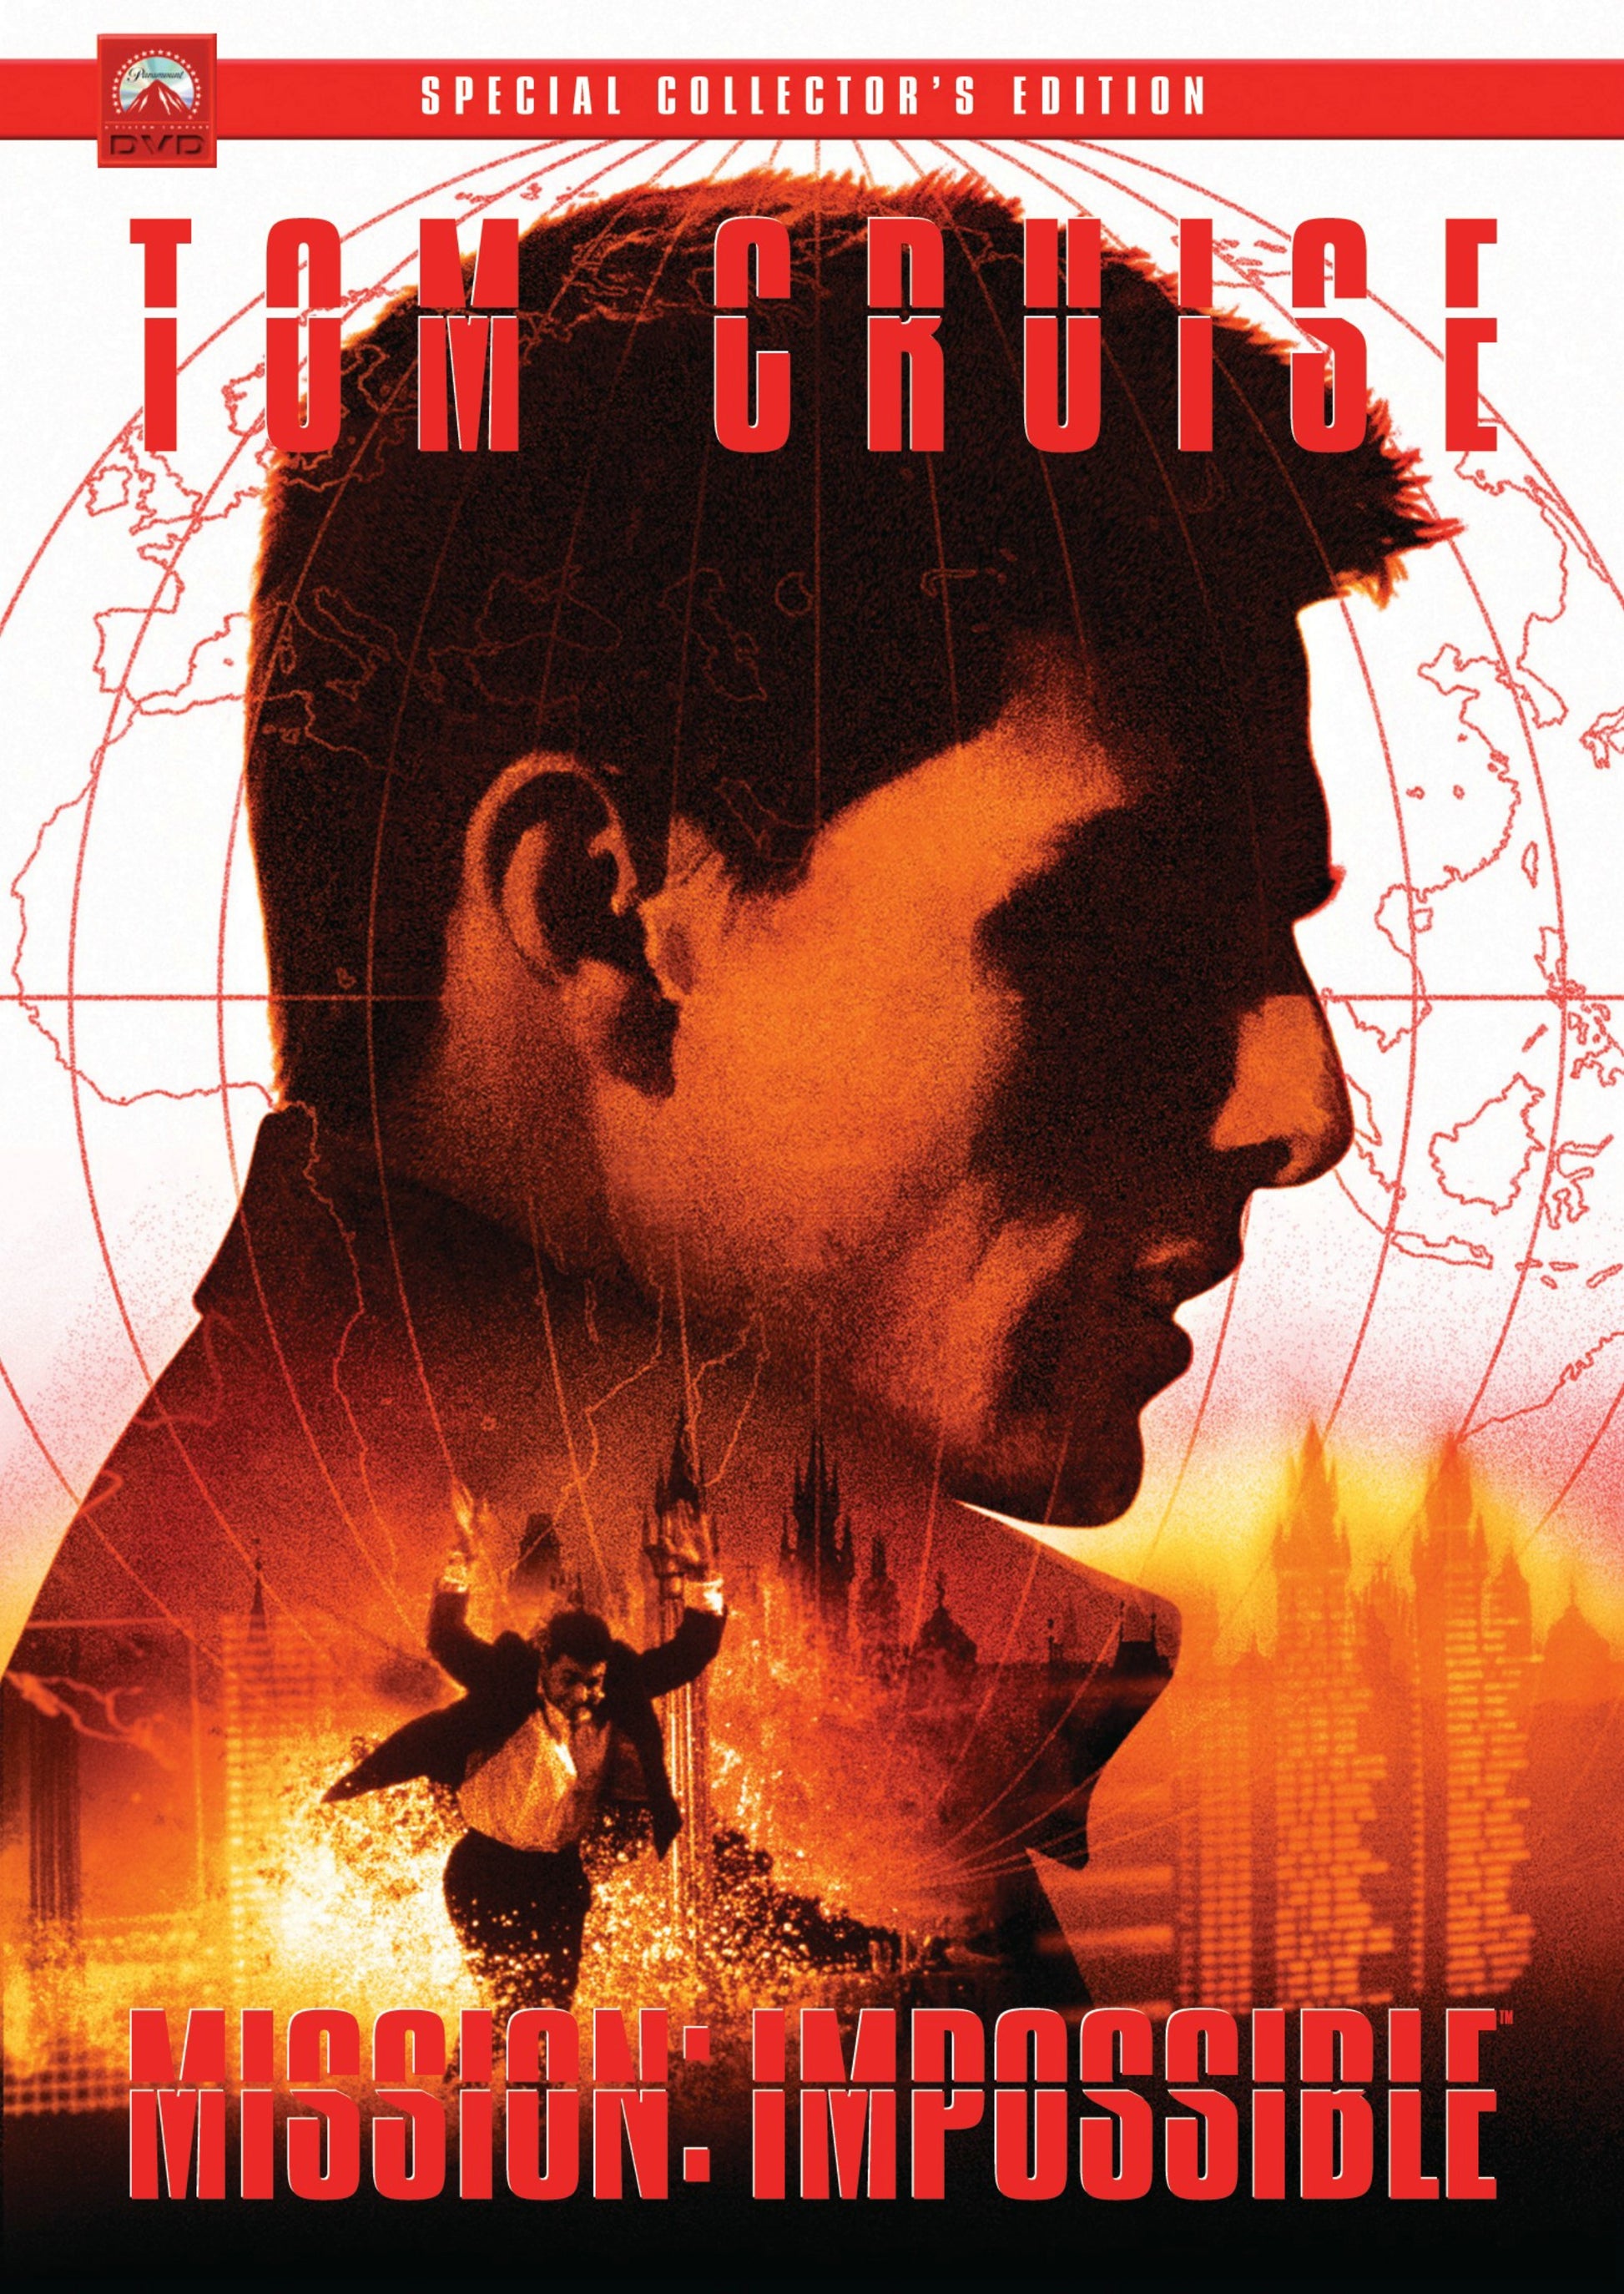 Mission: Impossible [Special Collector' Edition] cover art